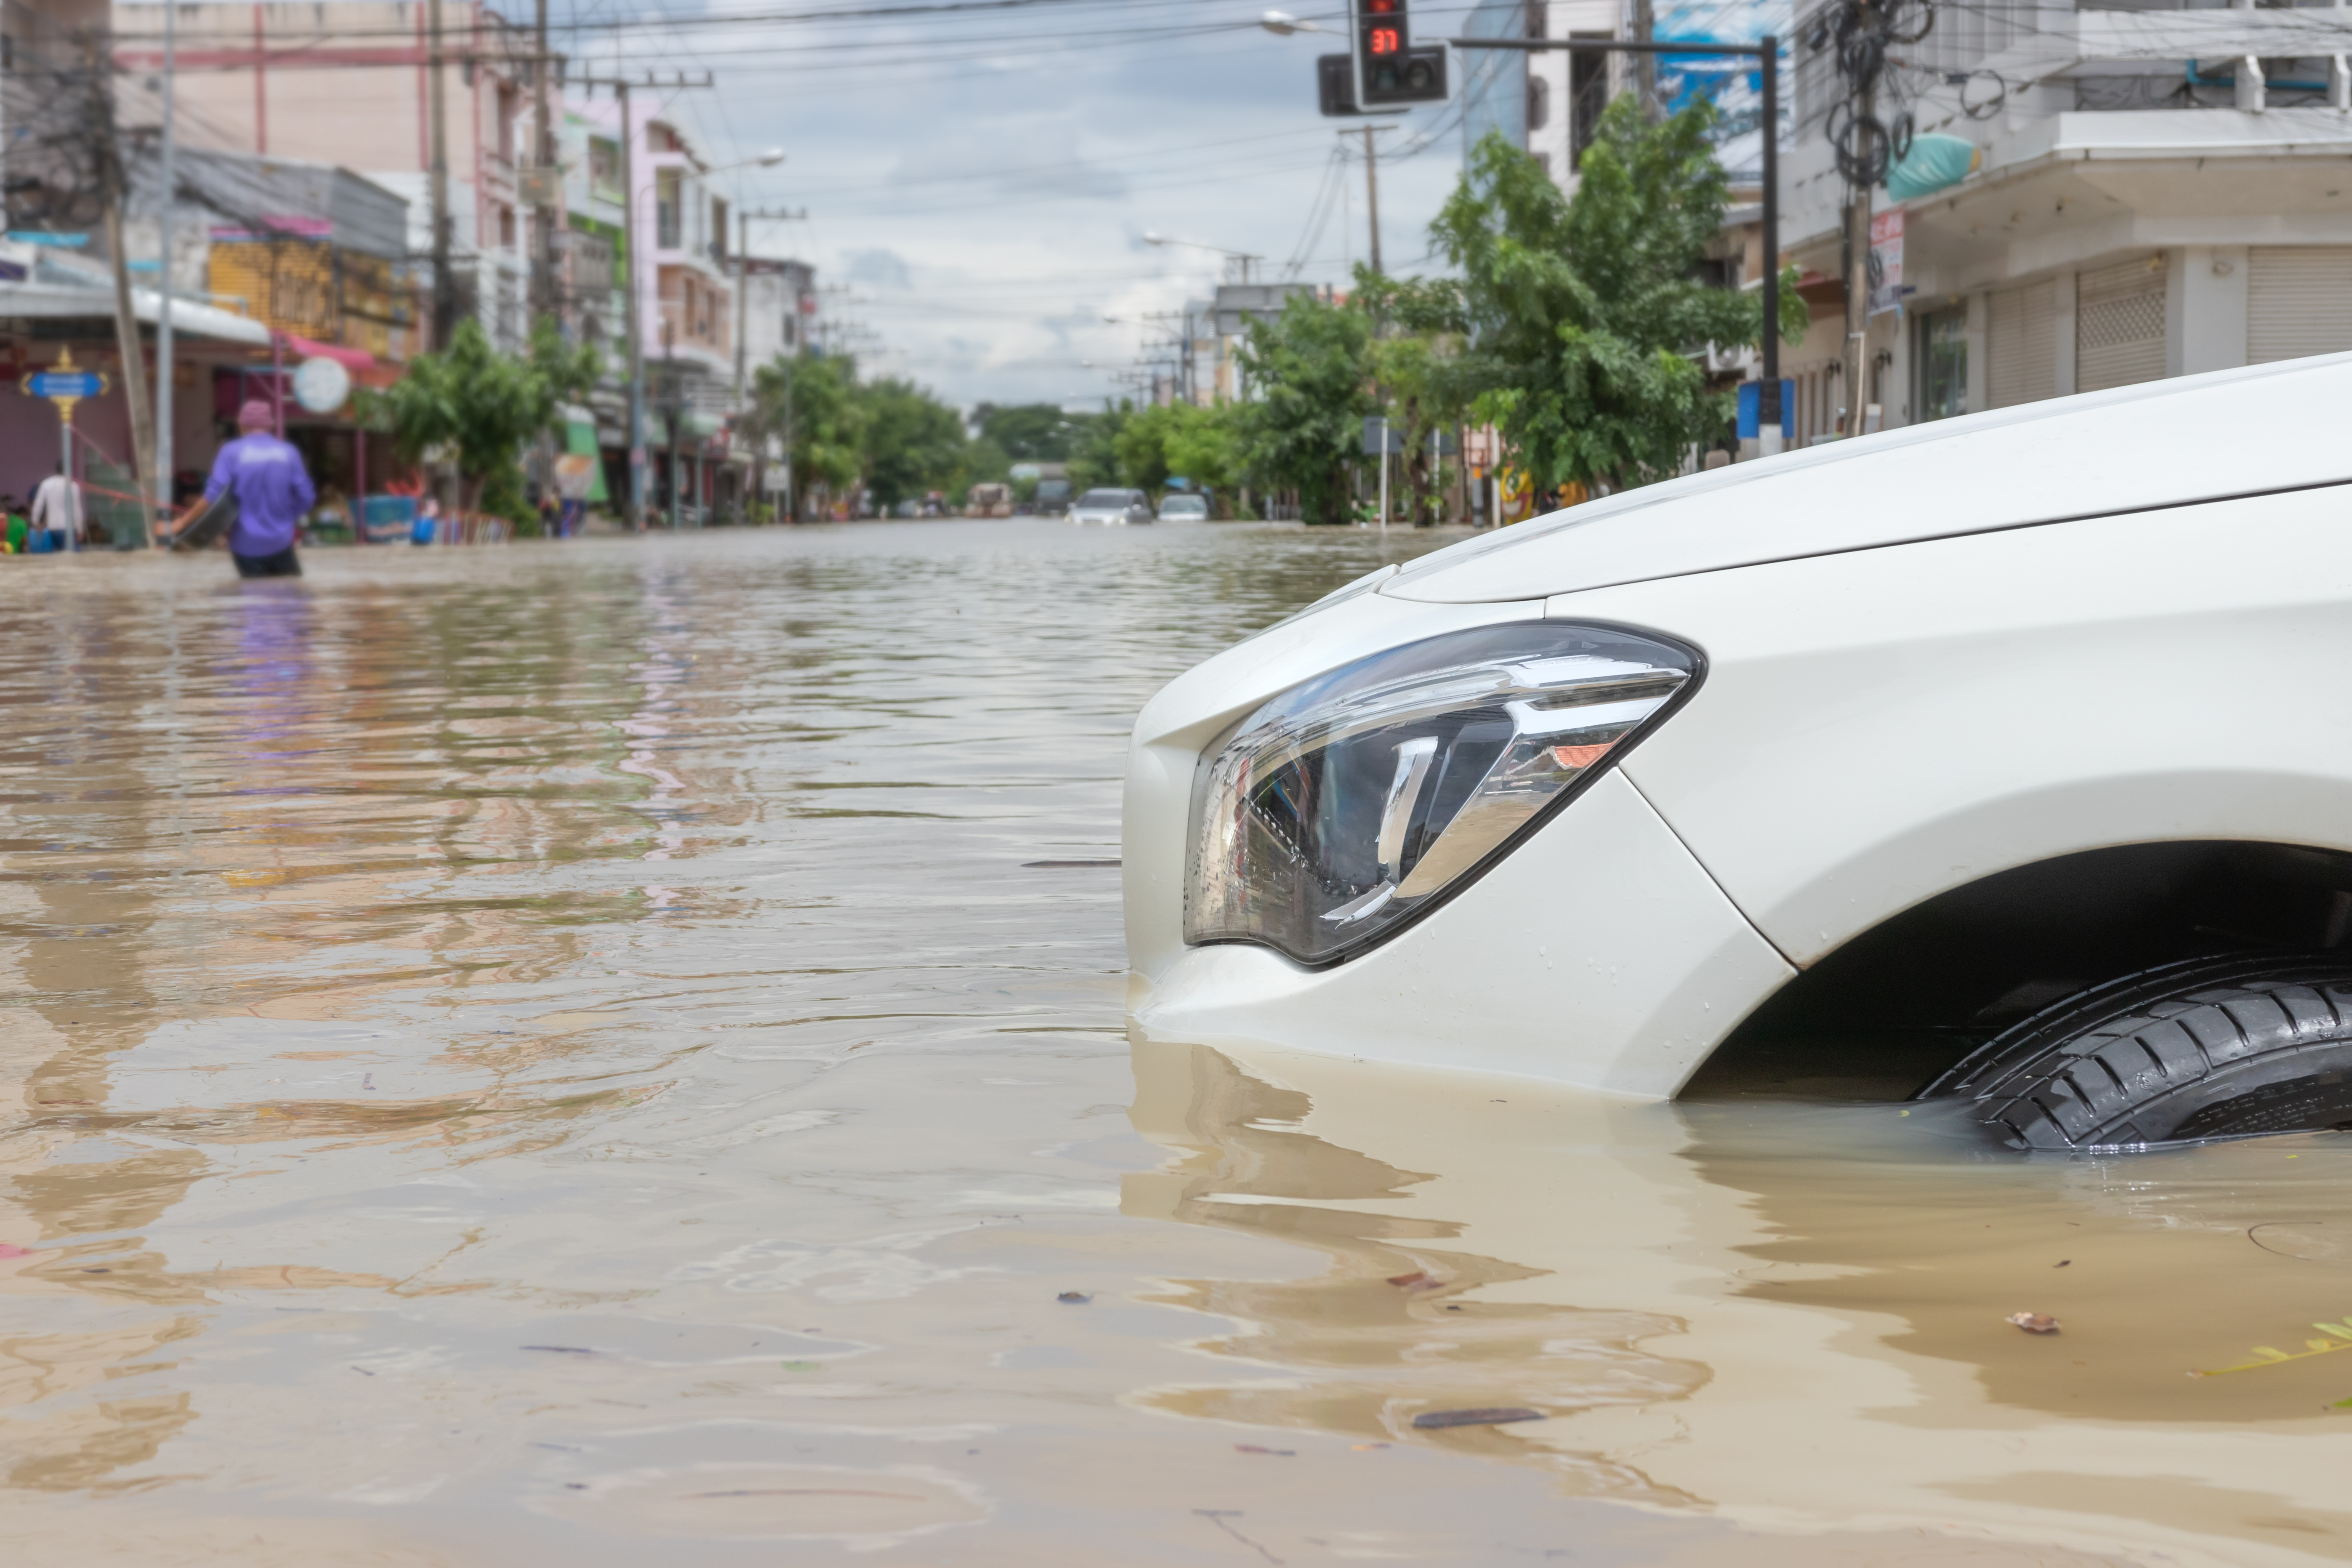 How to Tell if a Used Car has Flood Damage